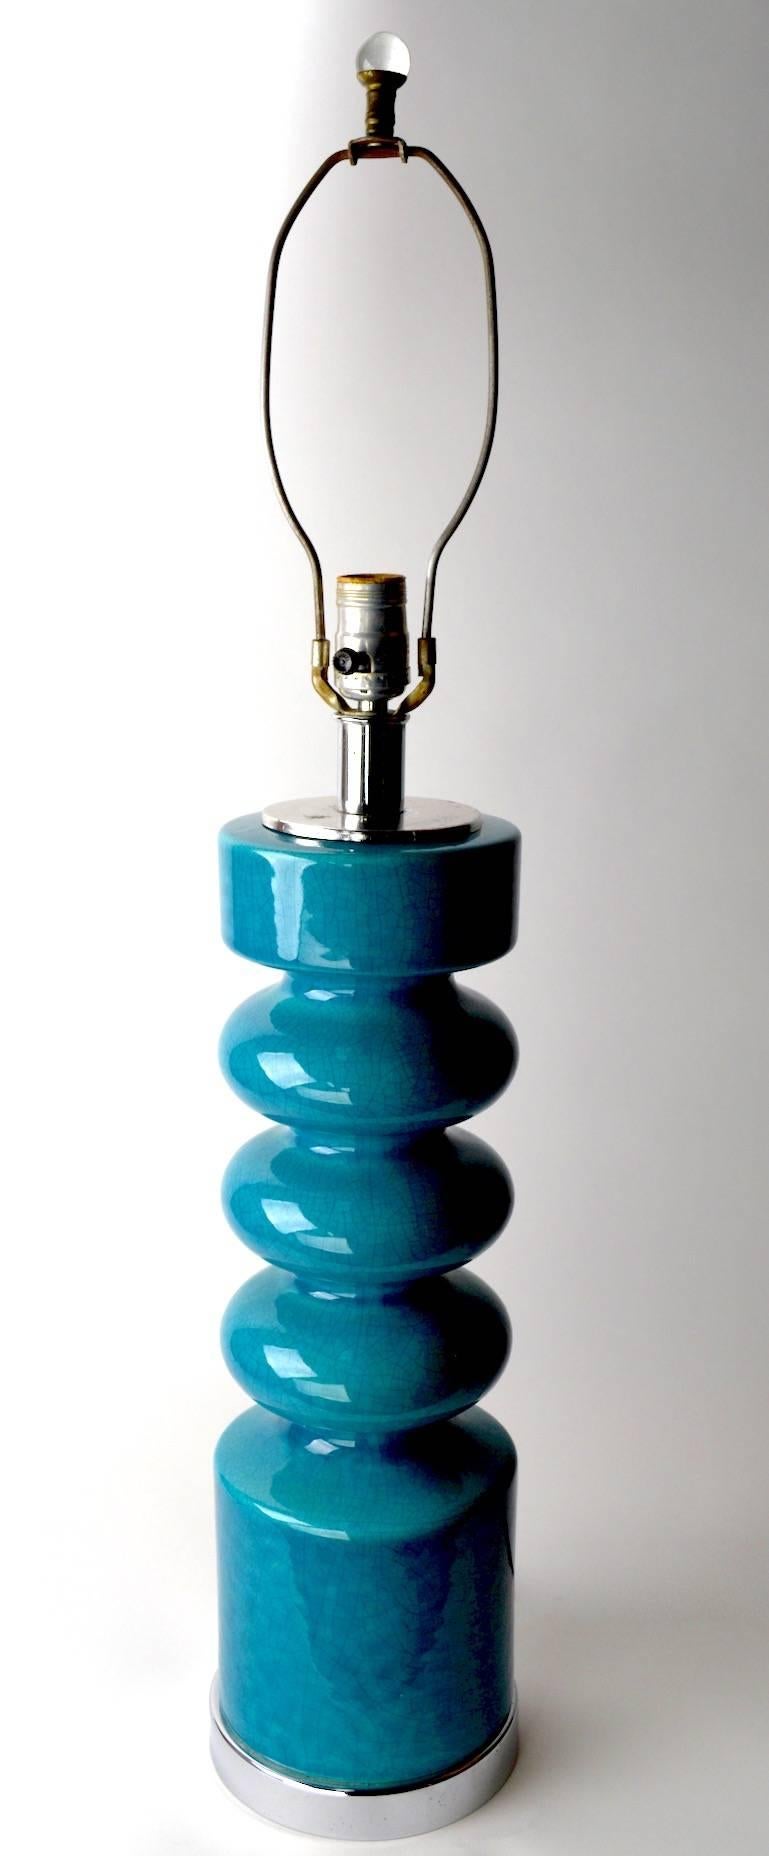 Cool Mod form turquoise table lamp. This lamp is in clean, original, and working condition, showing some wear to the chrome disk fitment at the top, as shown. Height to top of ceramic 19.25 inch x 33.5 inch total Height, shade not included.